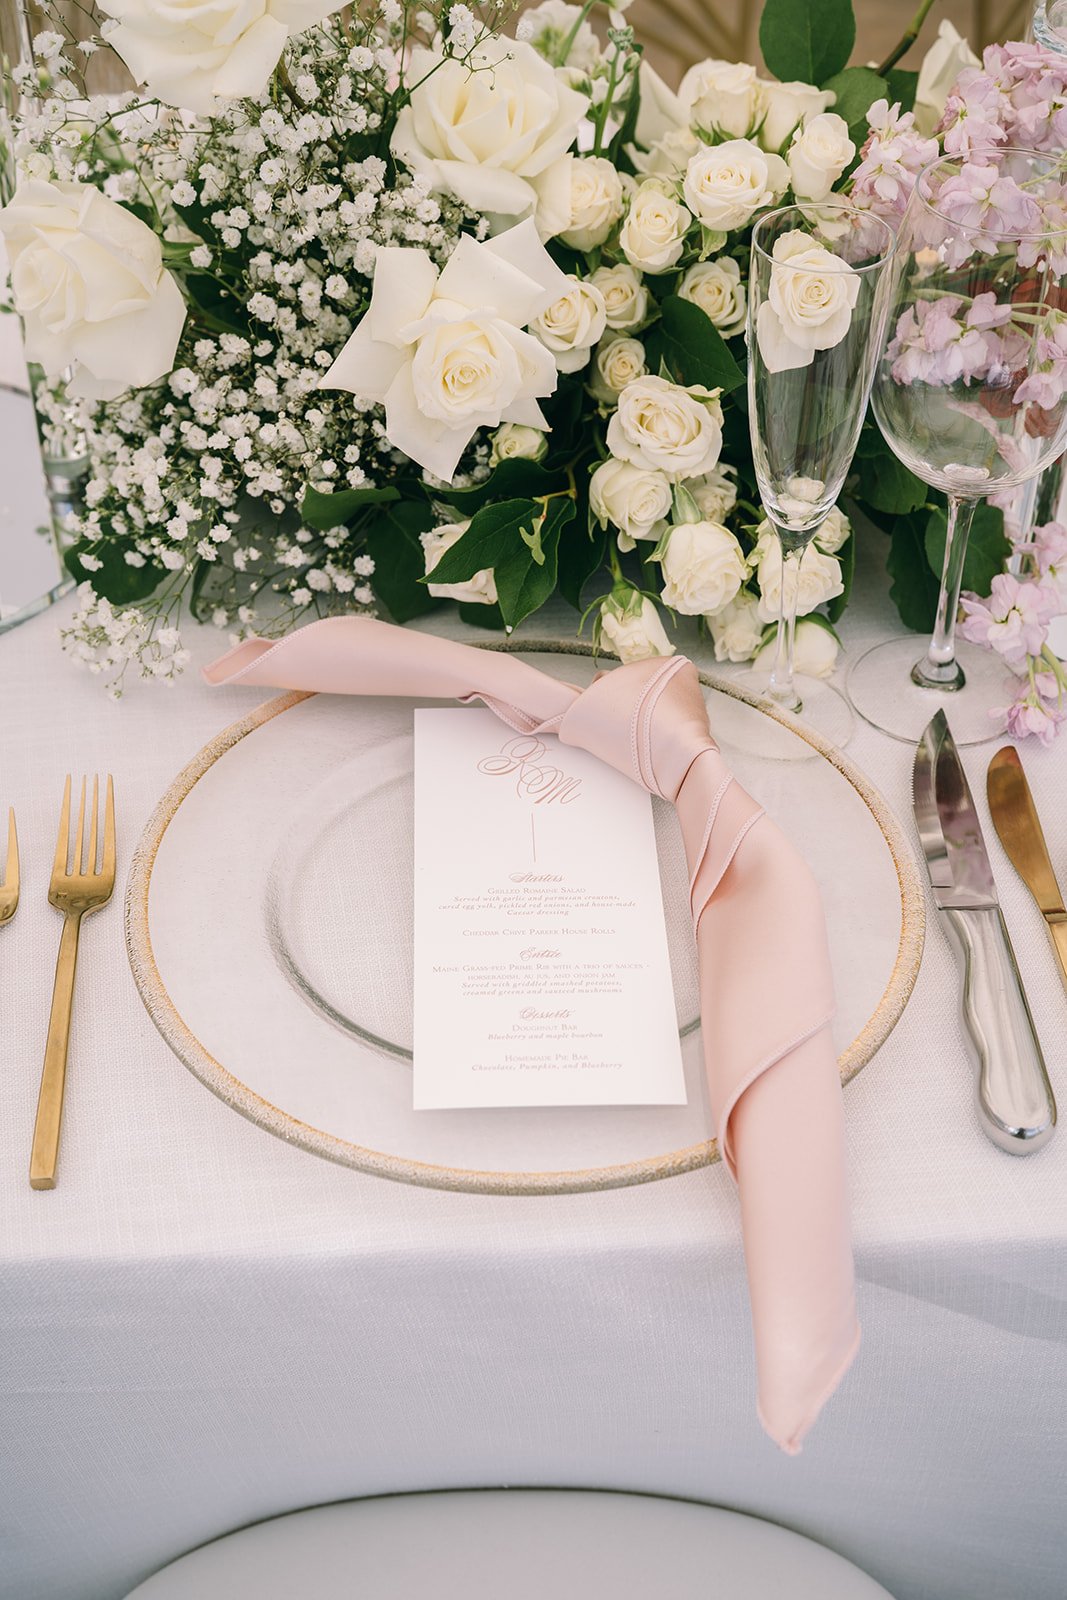 Singular Table Setting in Front of Classy Centerpiece